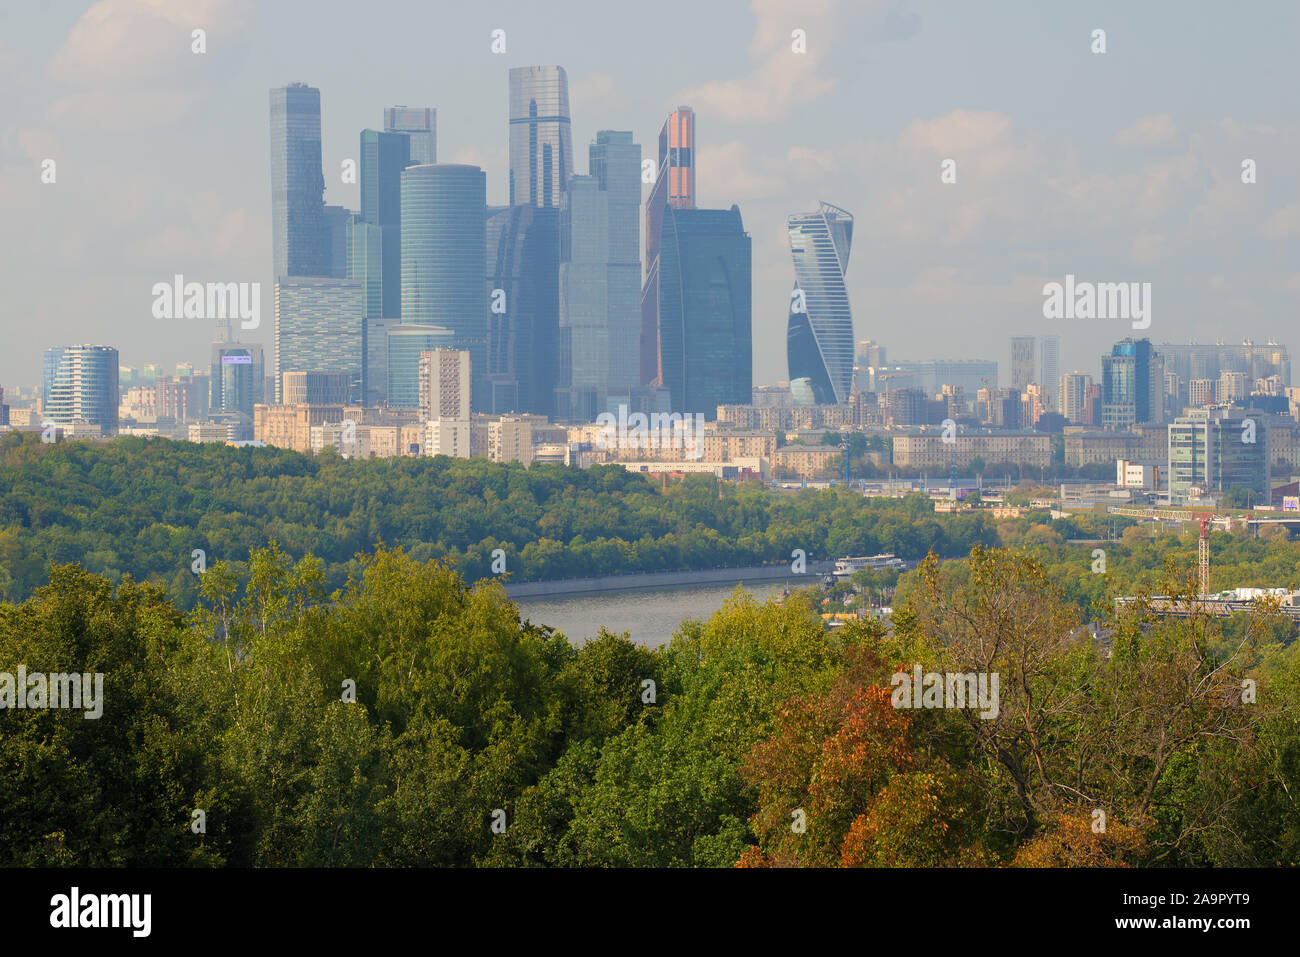 MOSCOW, RUSSIA - AUGUST 31, 2019: View of the modern business center 'Moscow City' from Sparrow Hills on a sunny August day Stock Photo